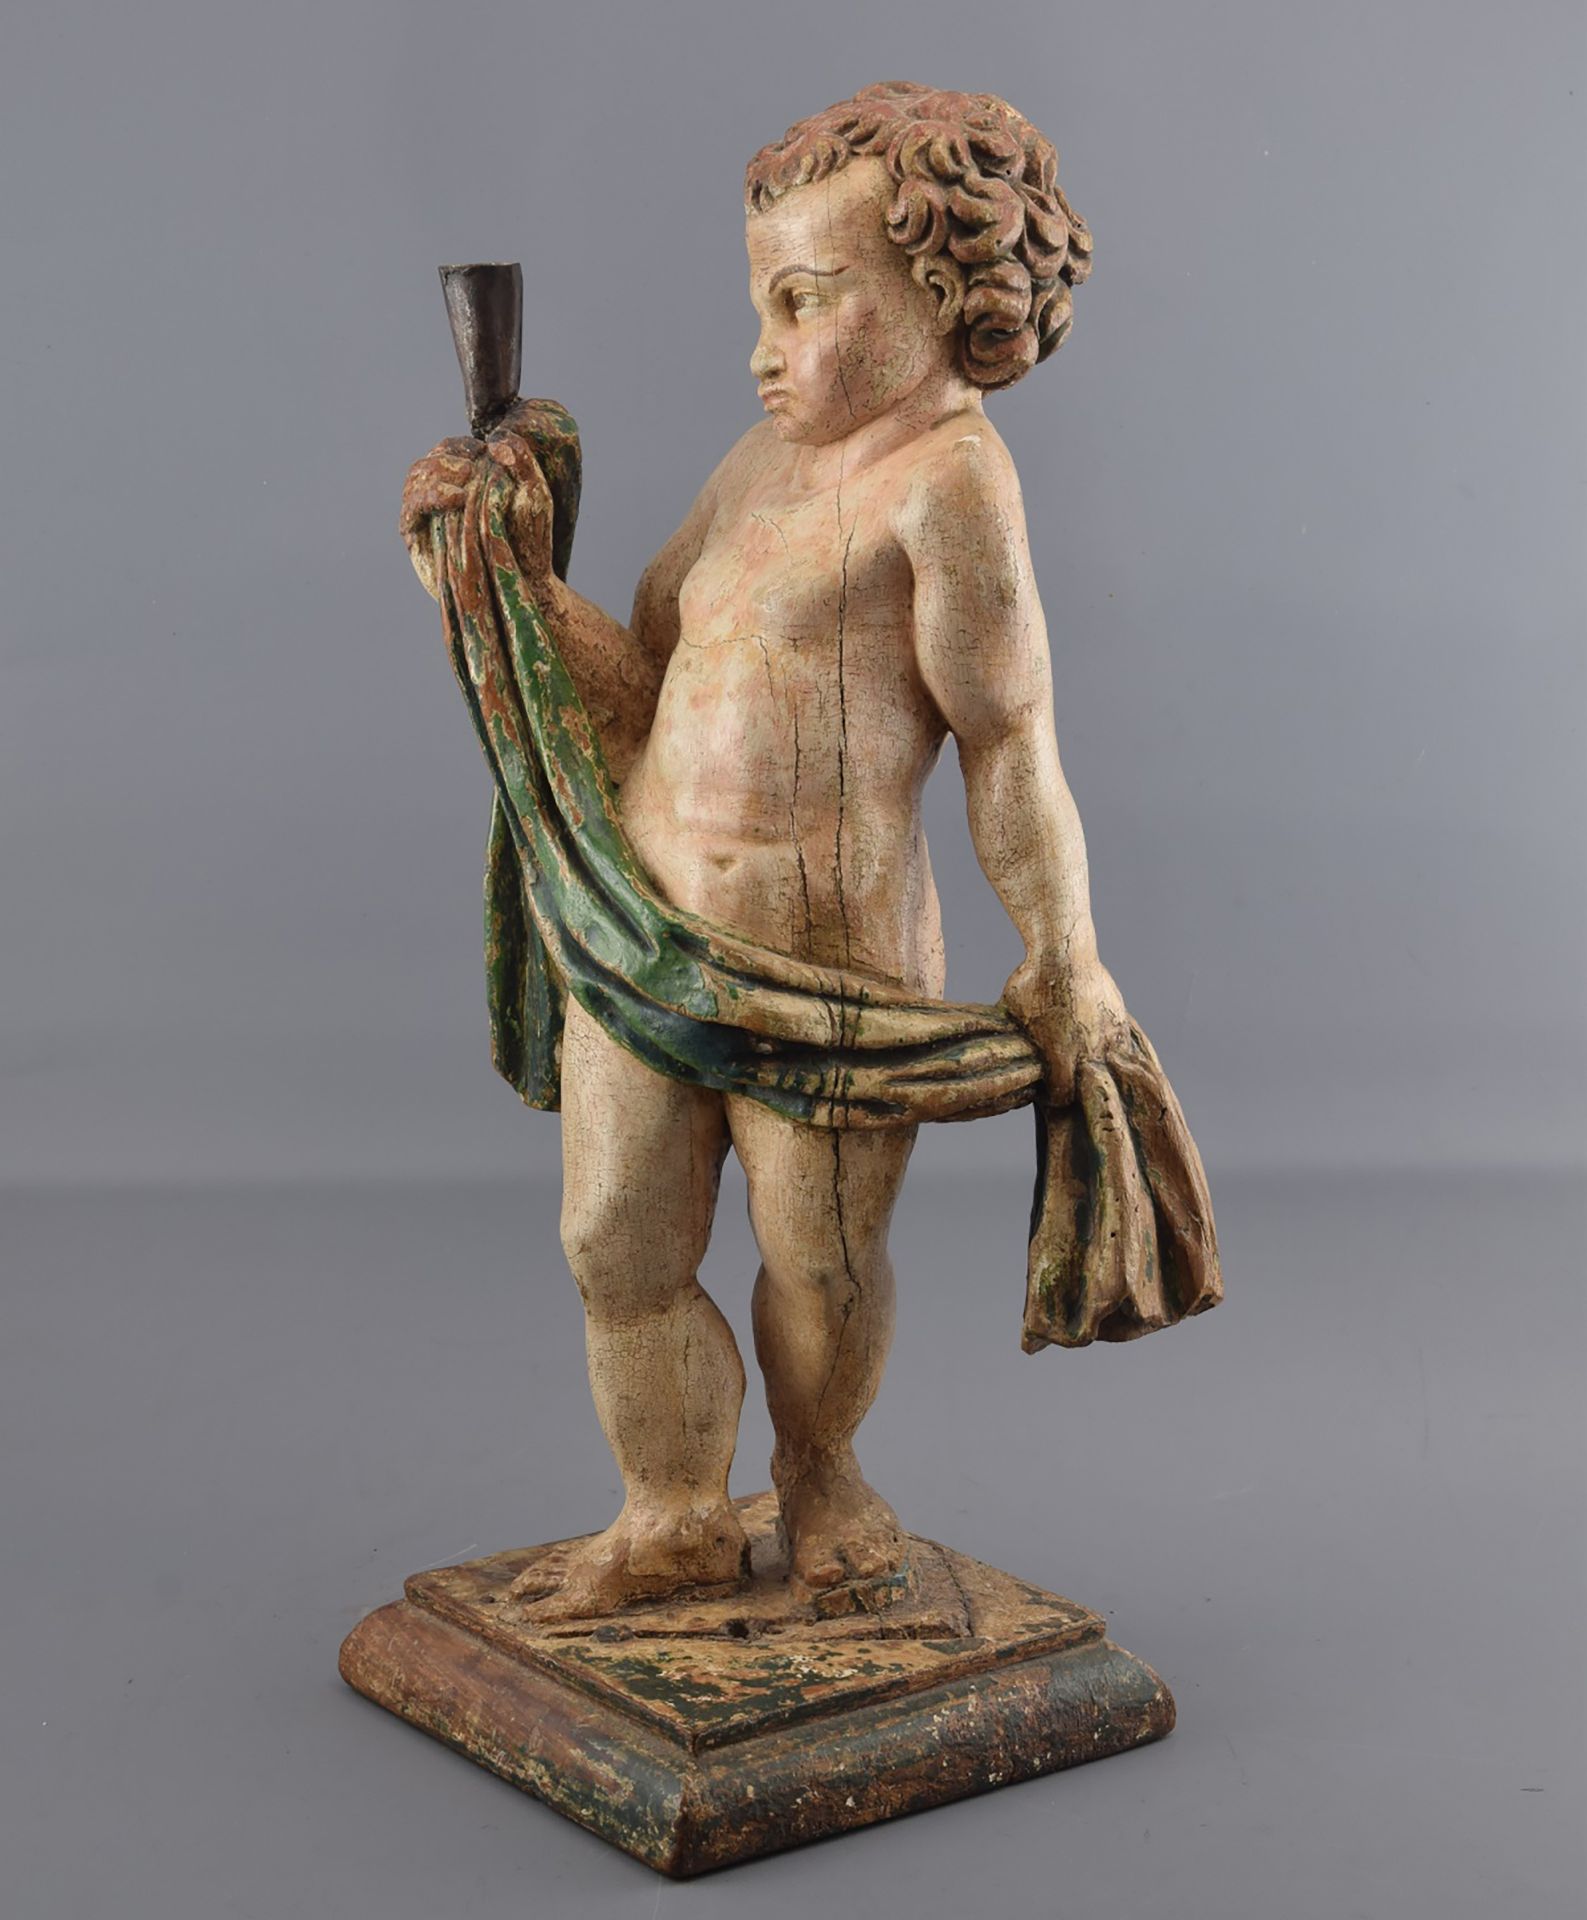 Romanist torchlighter from the 16th century - early 17th century - Bild 2 aus 6